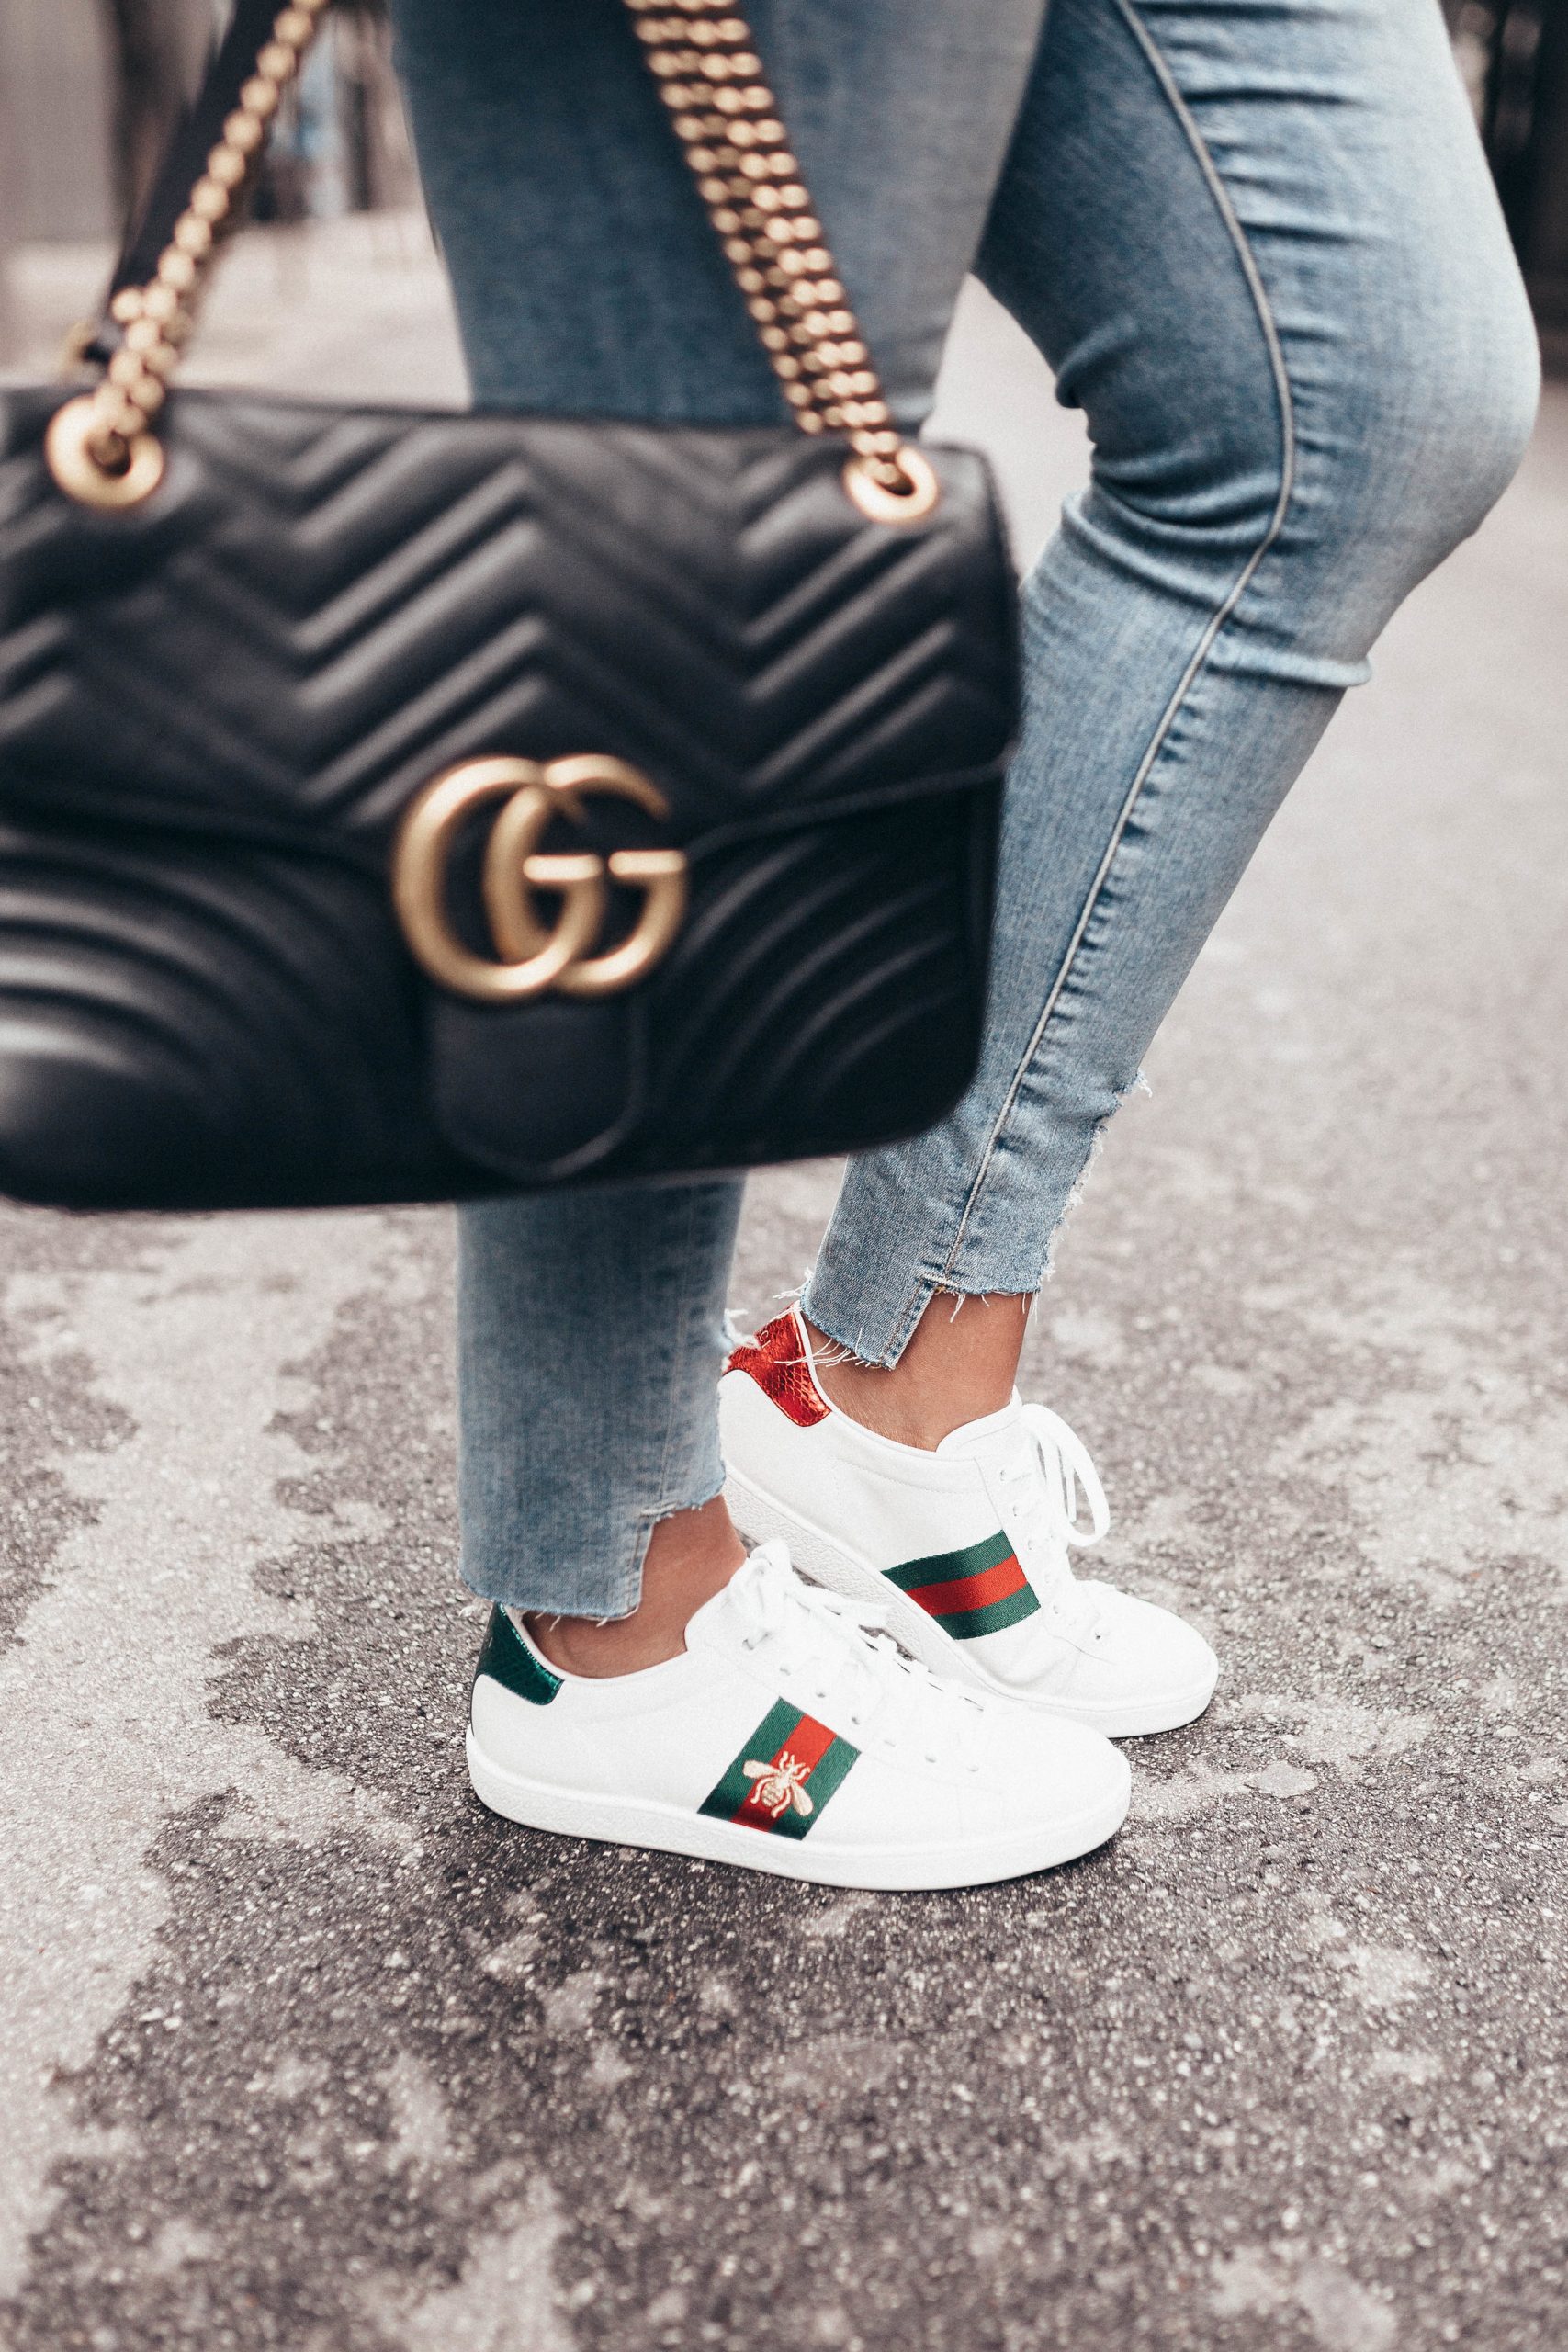 How to Clean Gucci Sneakers (or any shoes) - Ashley & Emily